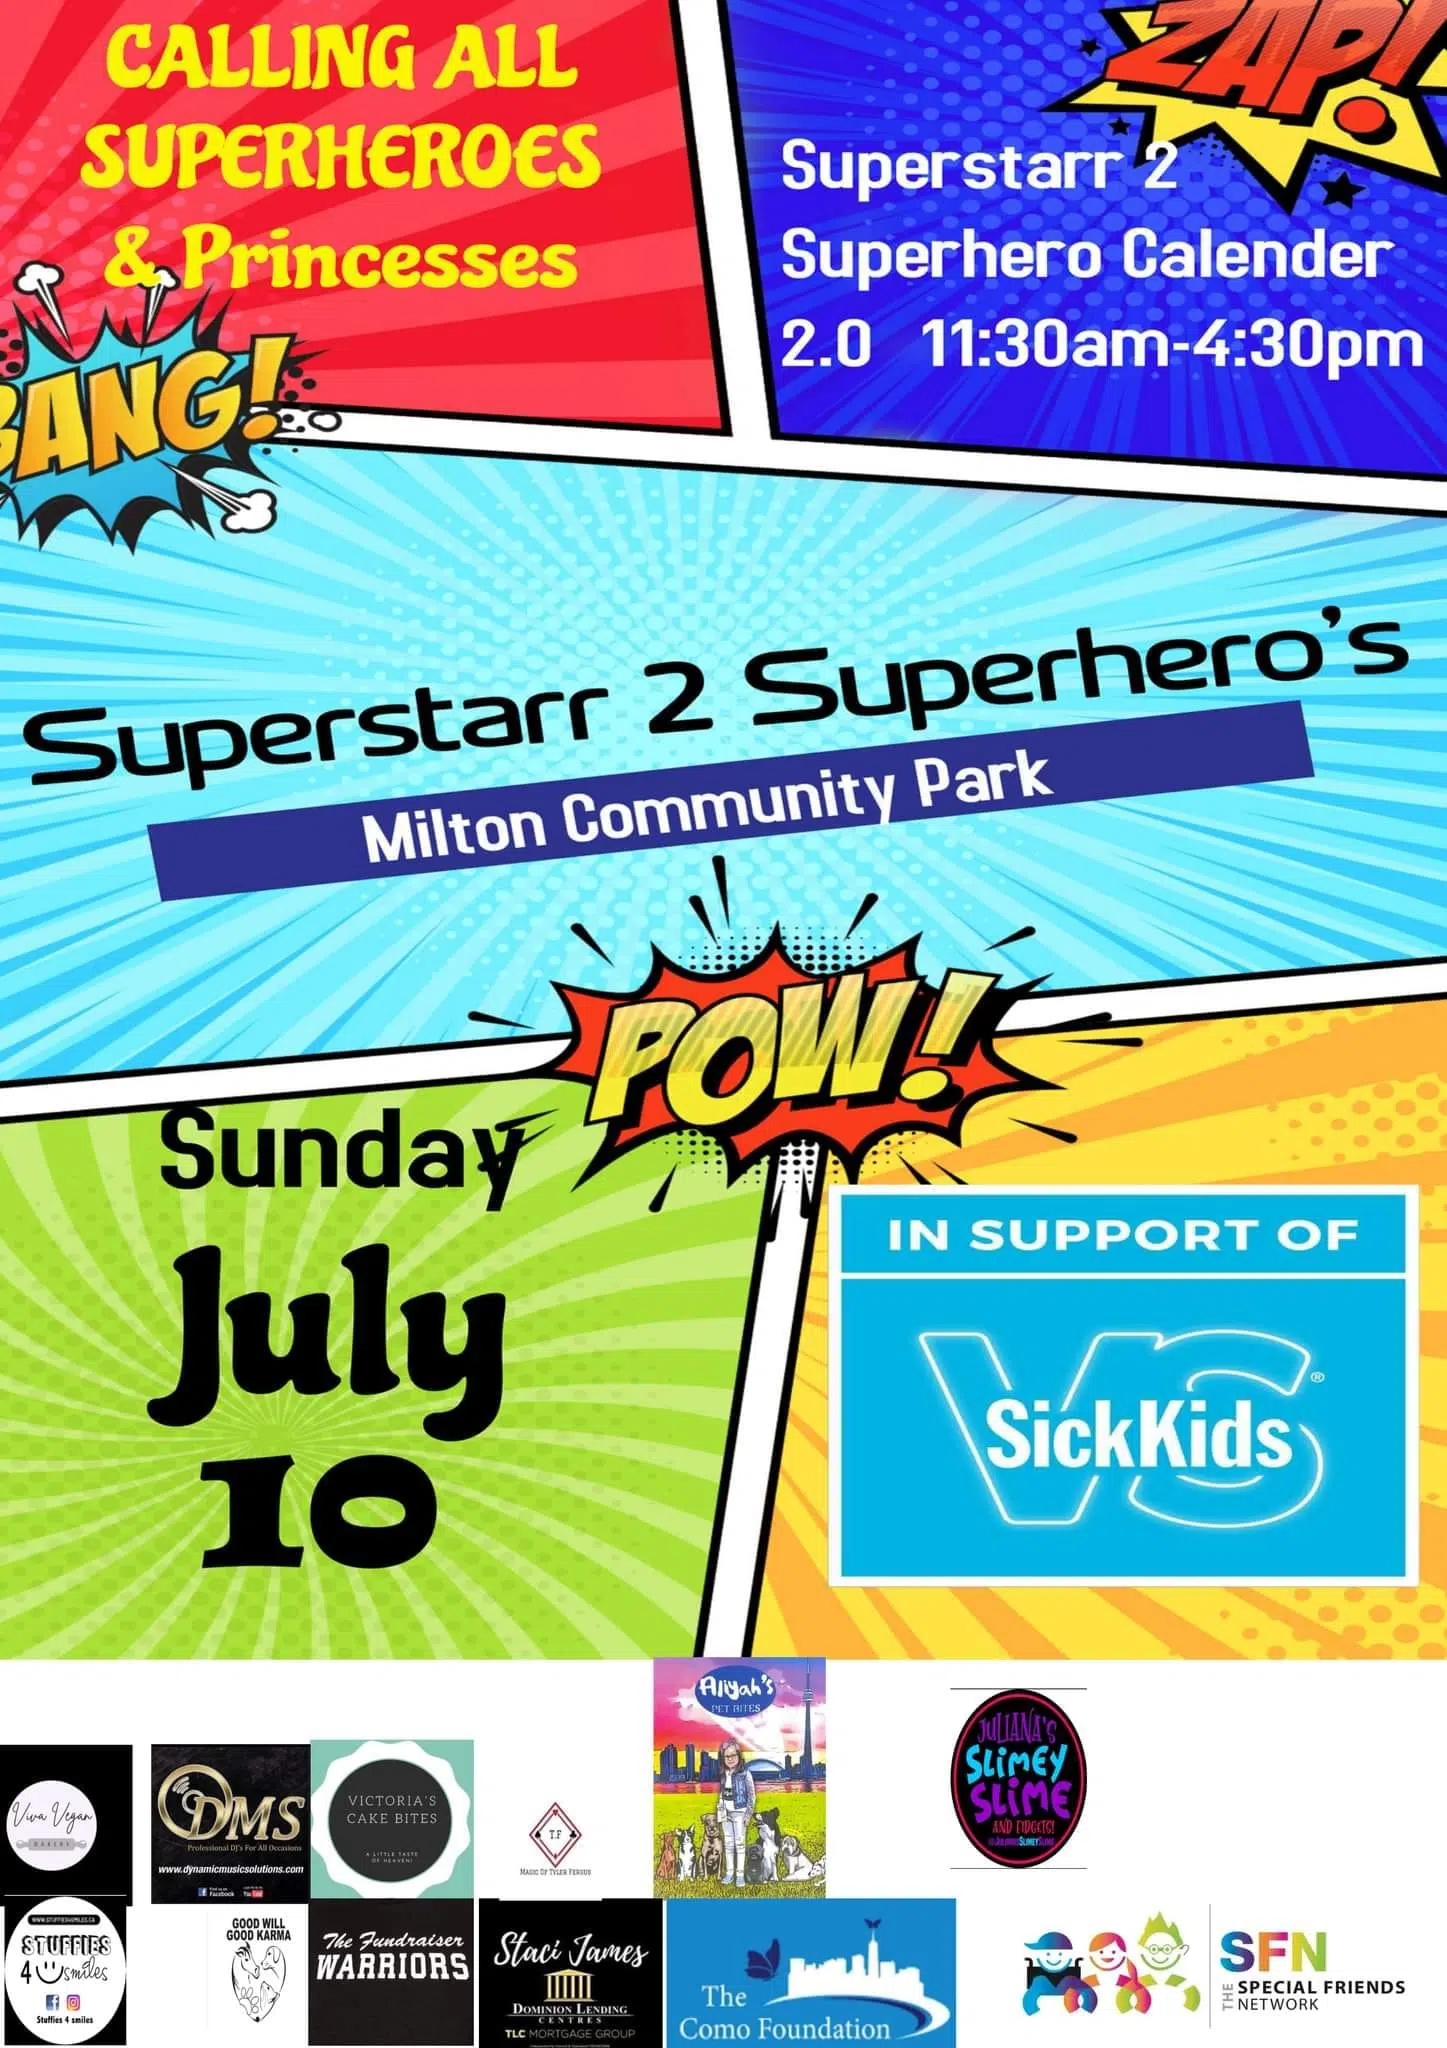 A local event is supporting SickKids on July 10th